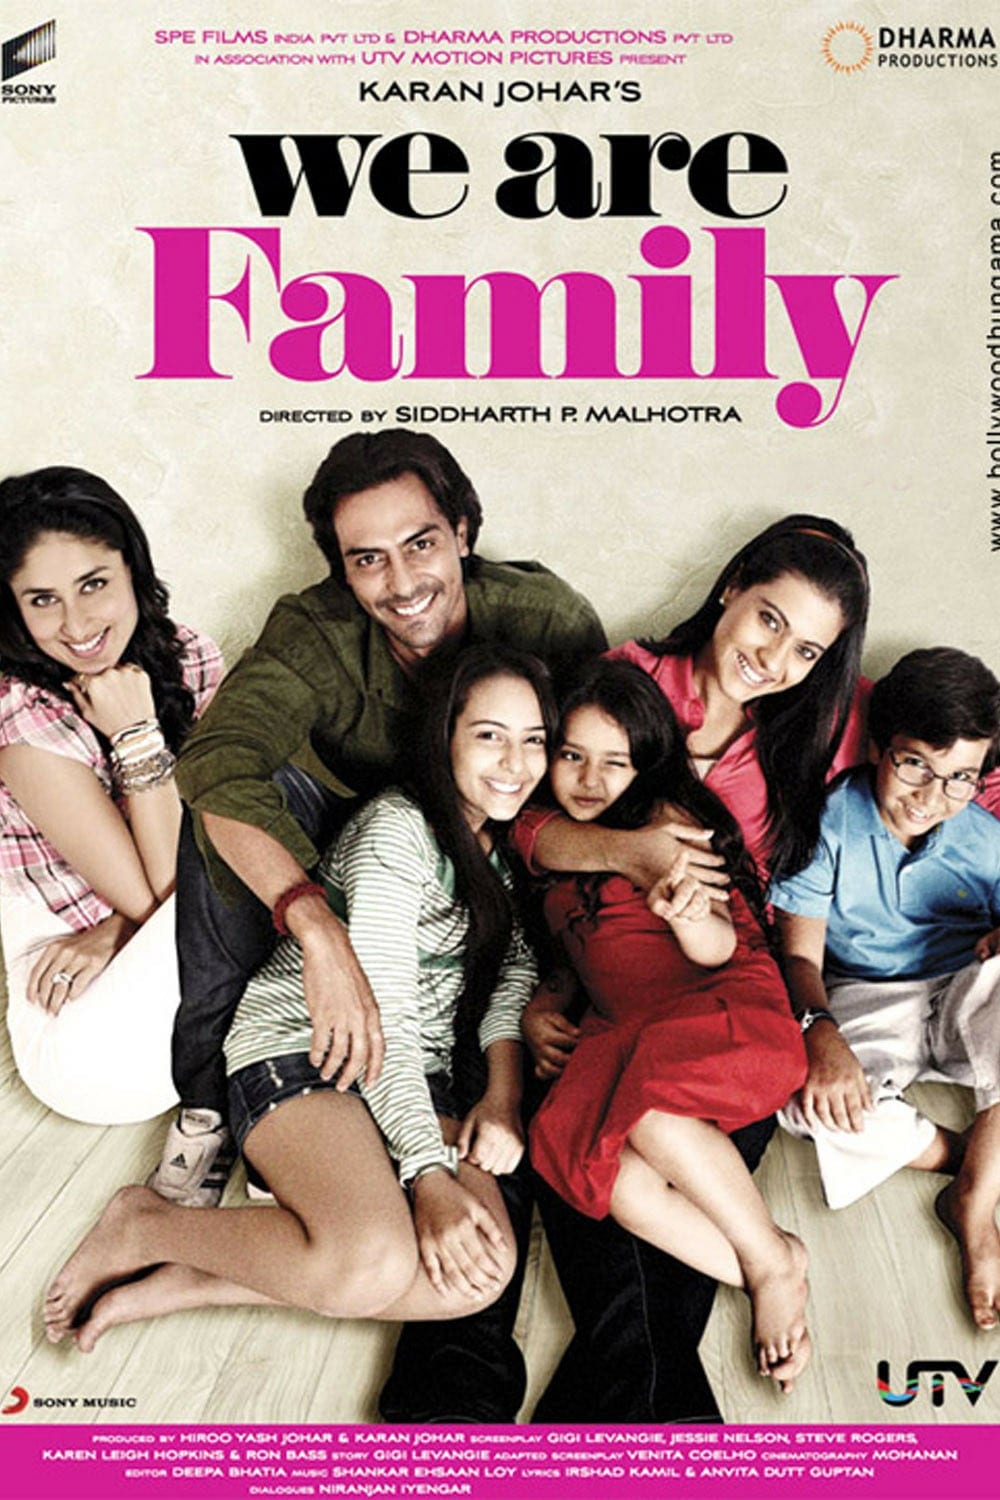 Poster for the movie "We Are Family"